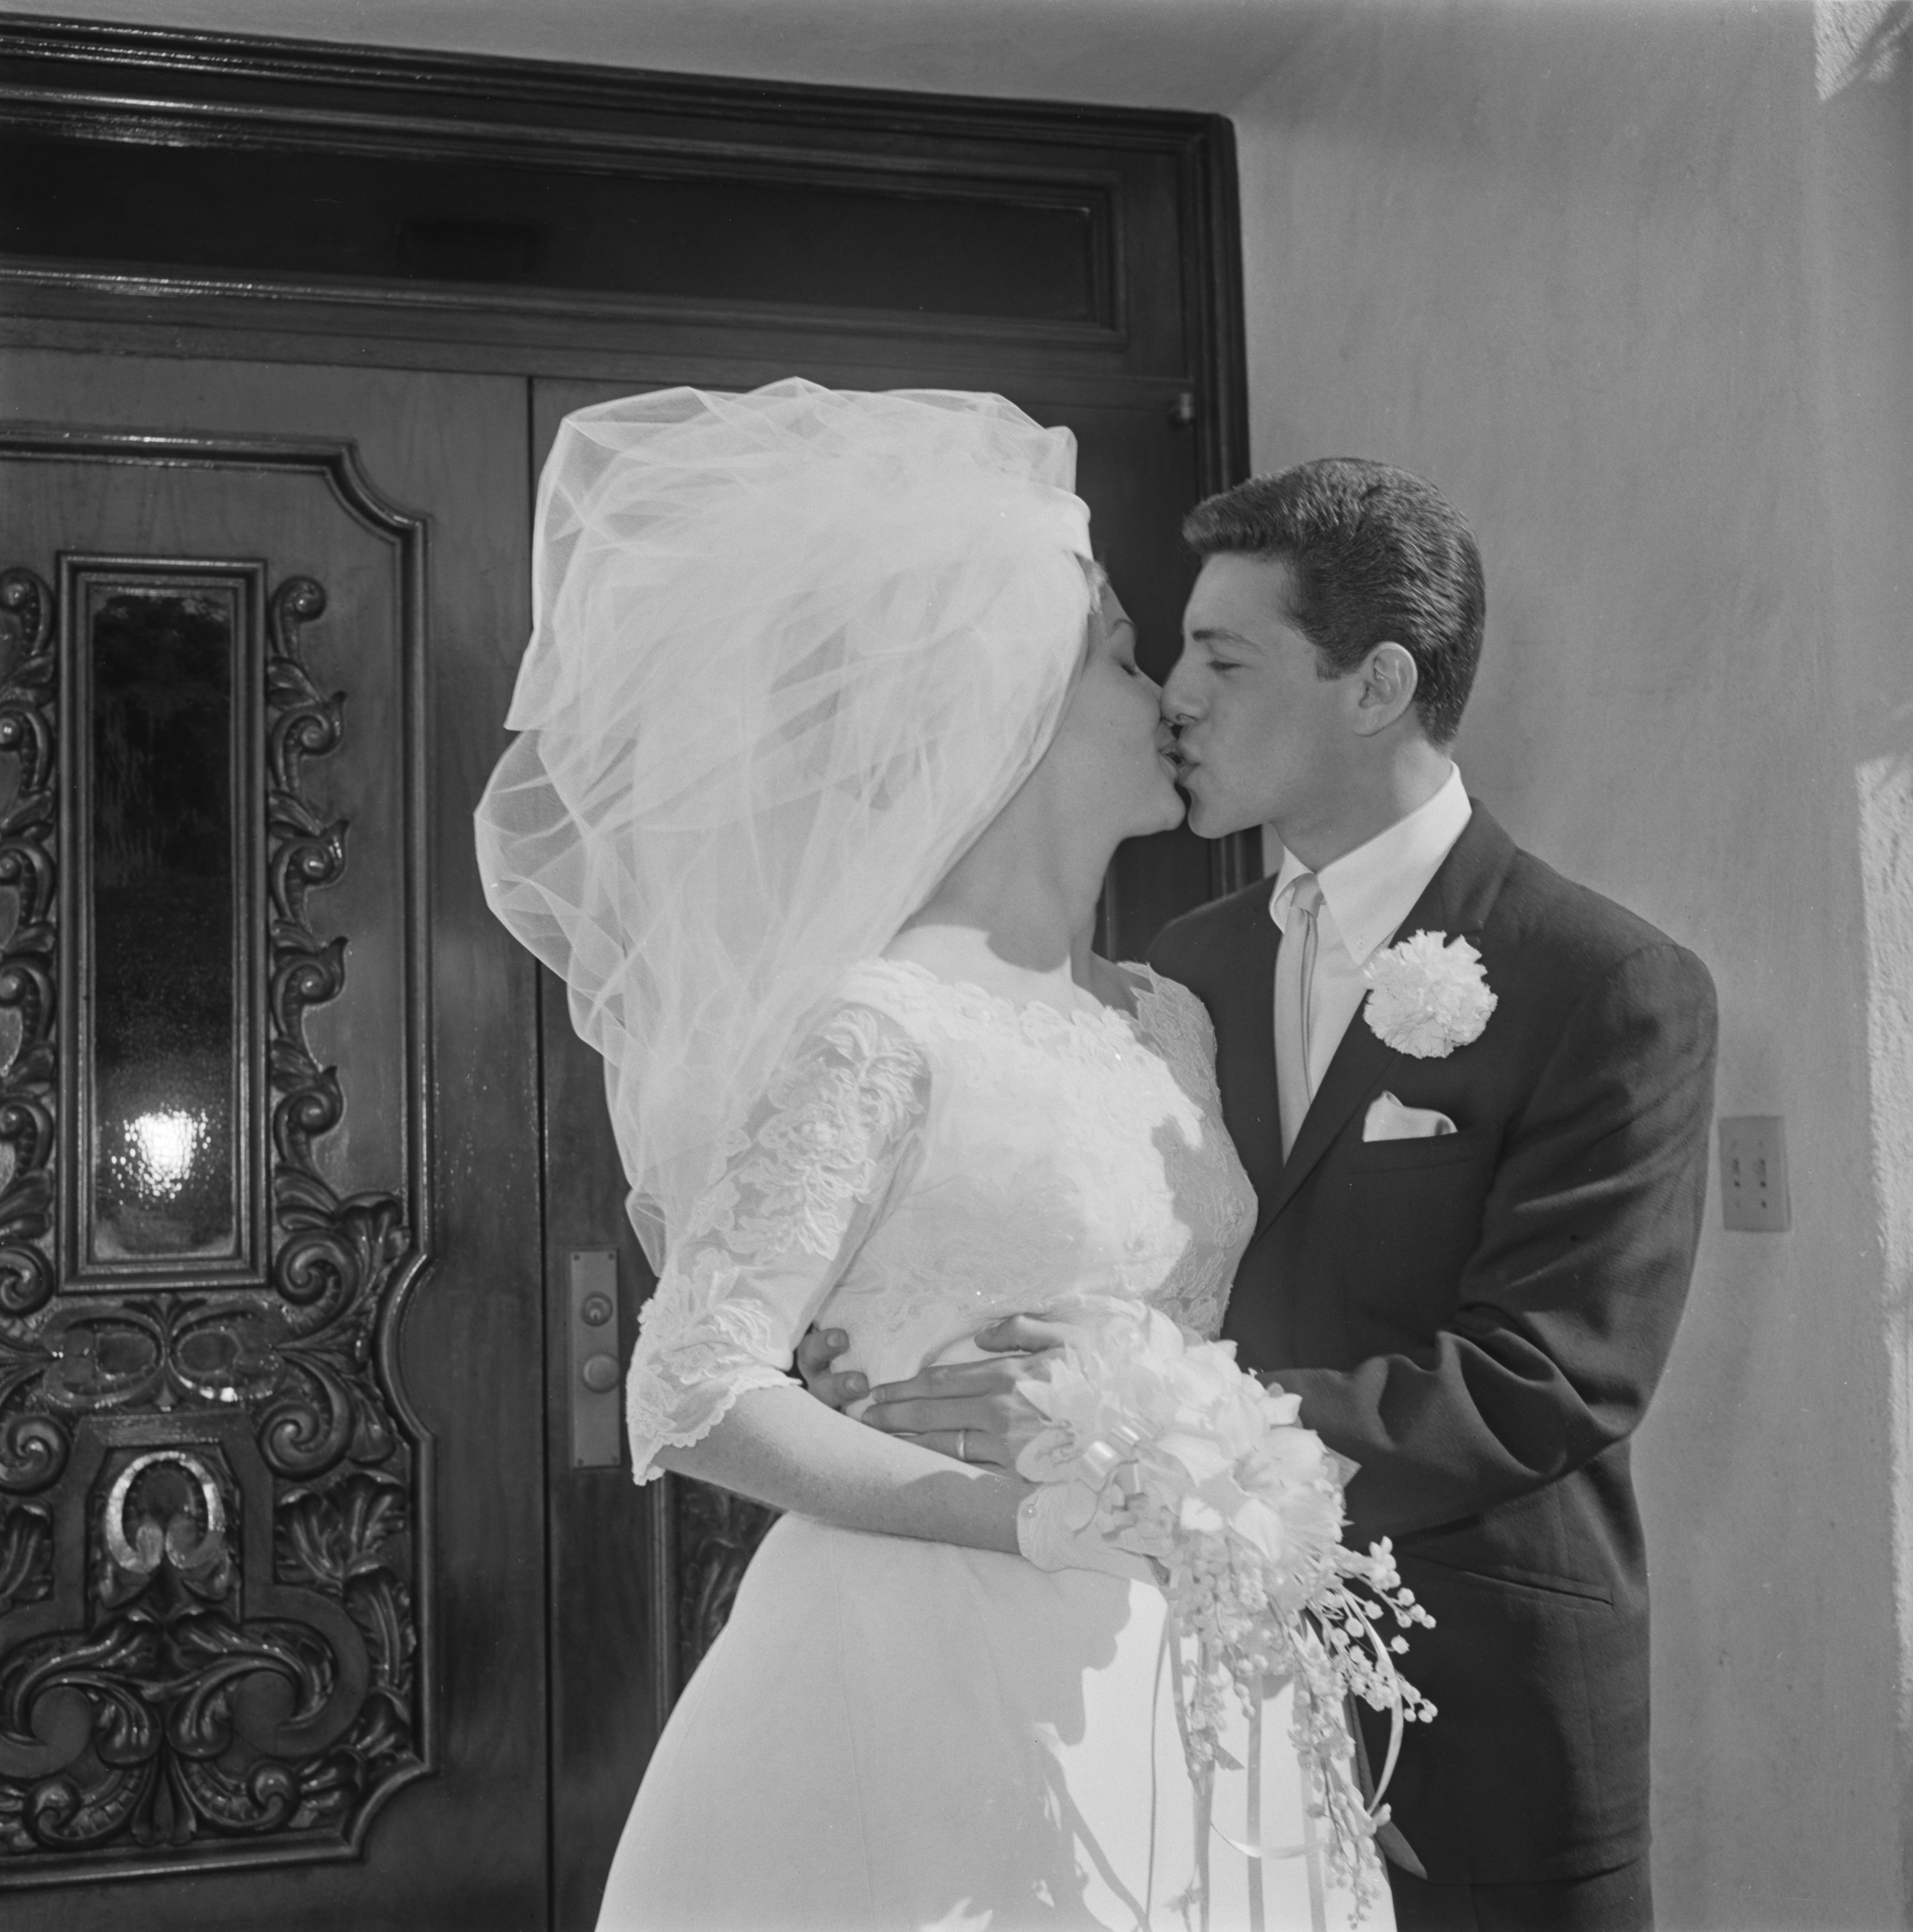 American actor and singer Frankie Avalon with his bride Kathryn 'Kay' Diebel after their wedding in North Hollywood, California on January 19, 1963. | Source: Getty Images